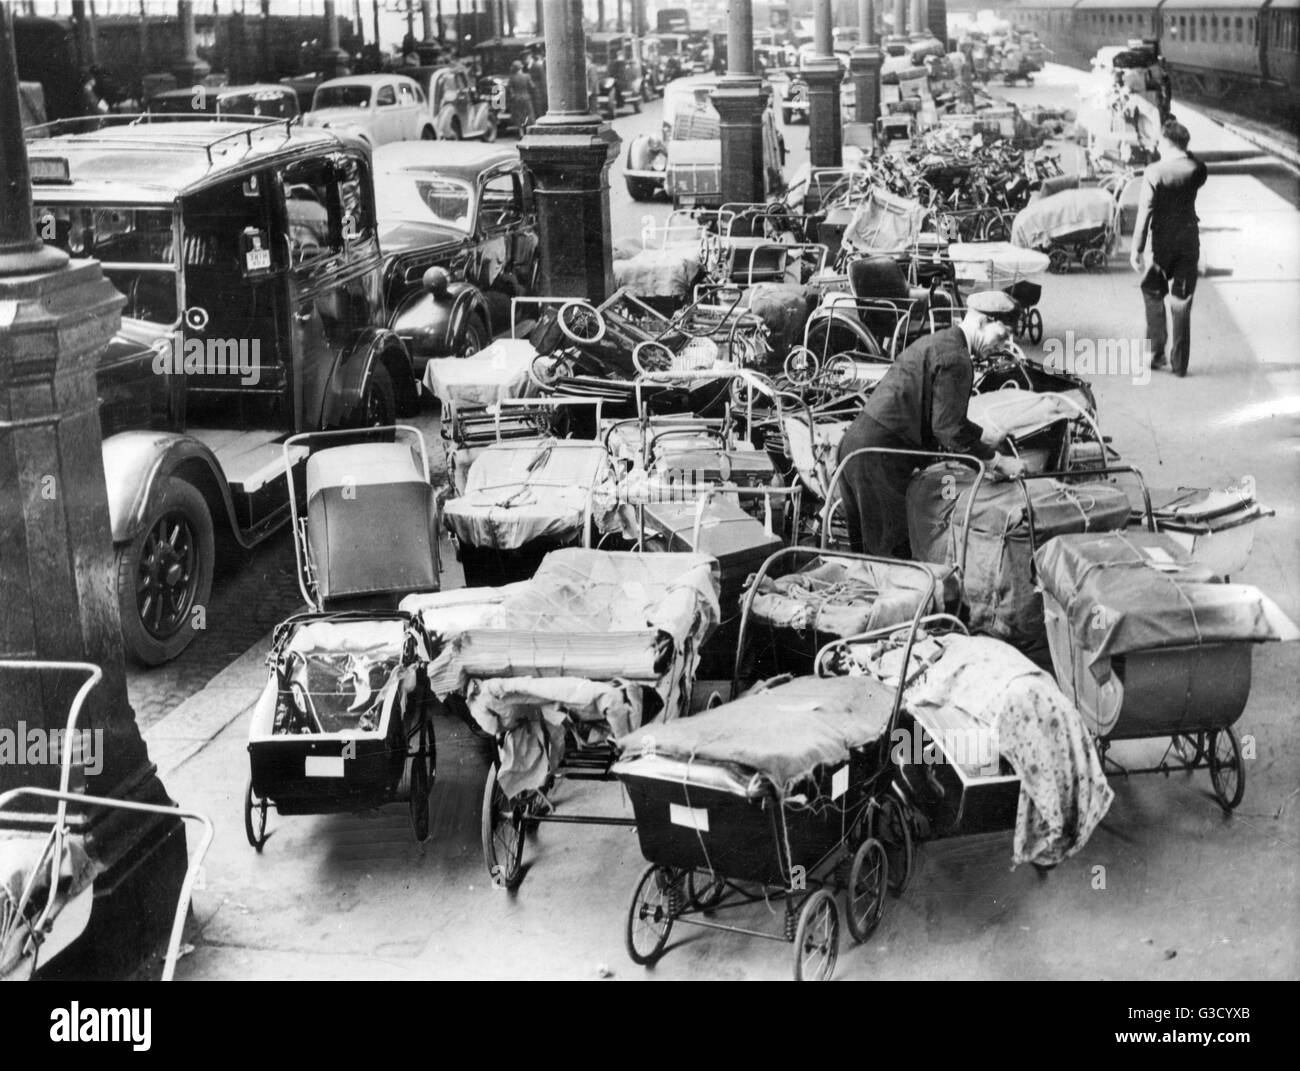 WW2 - Prams containing possessions return to Euston, London, following Evacuees heading home after the passing of the V1 and V2 rocket attack scare - September 1944.     Date: 1944 Stock Photo